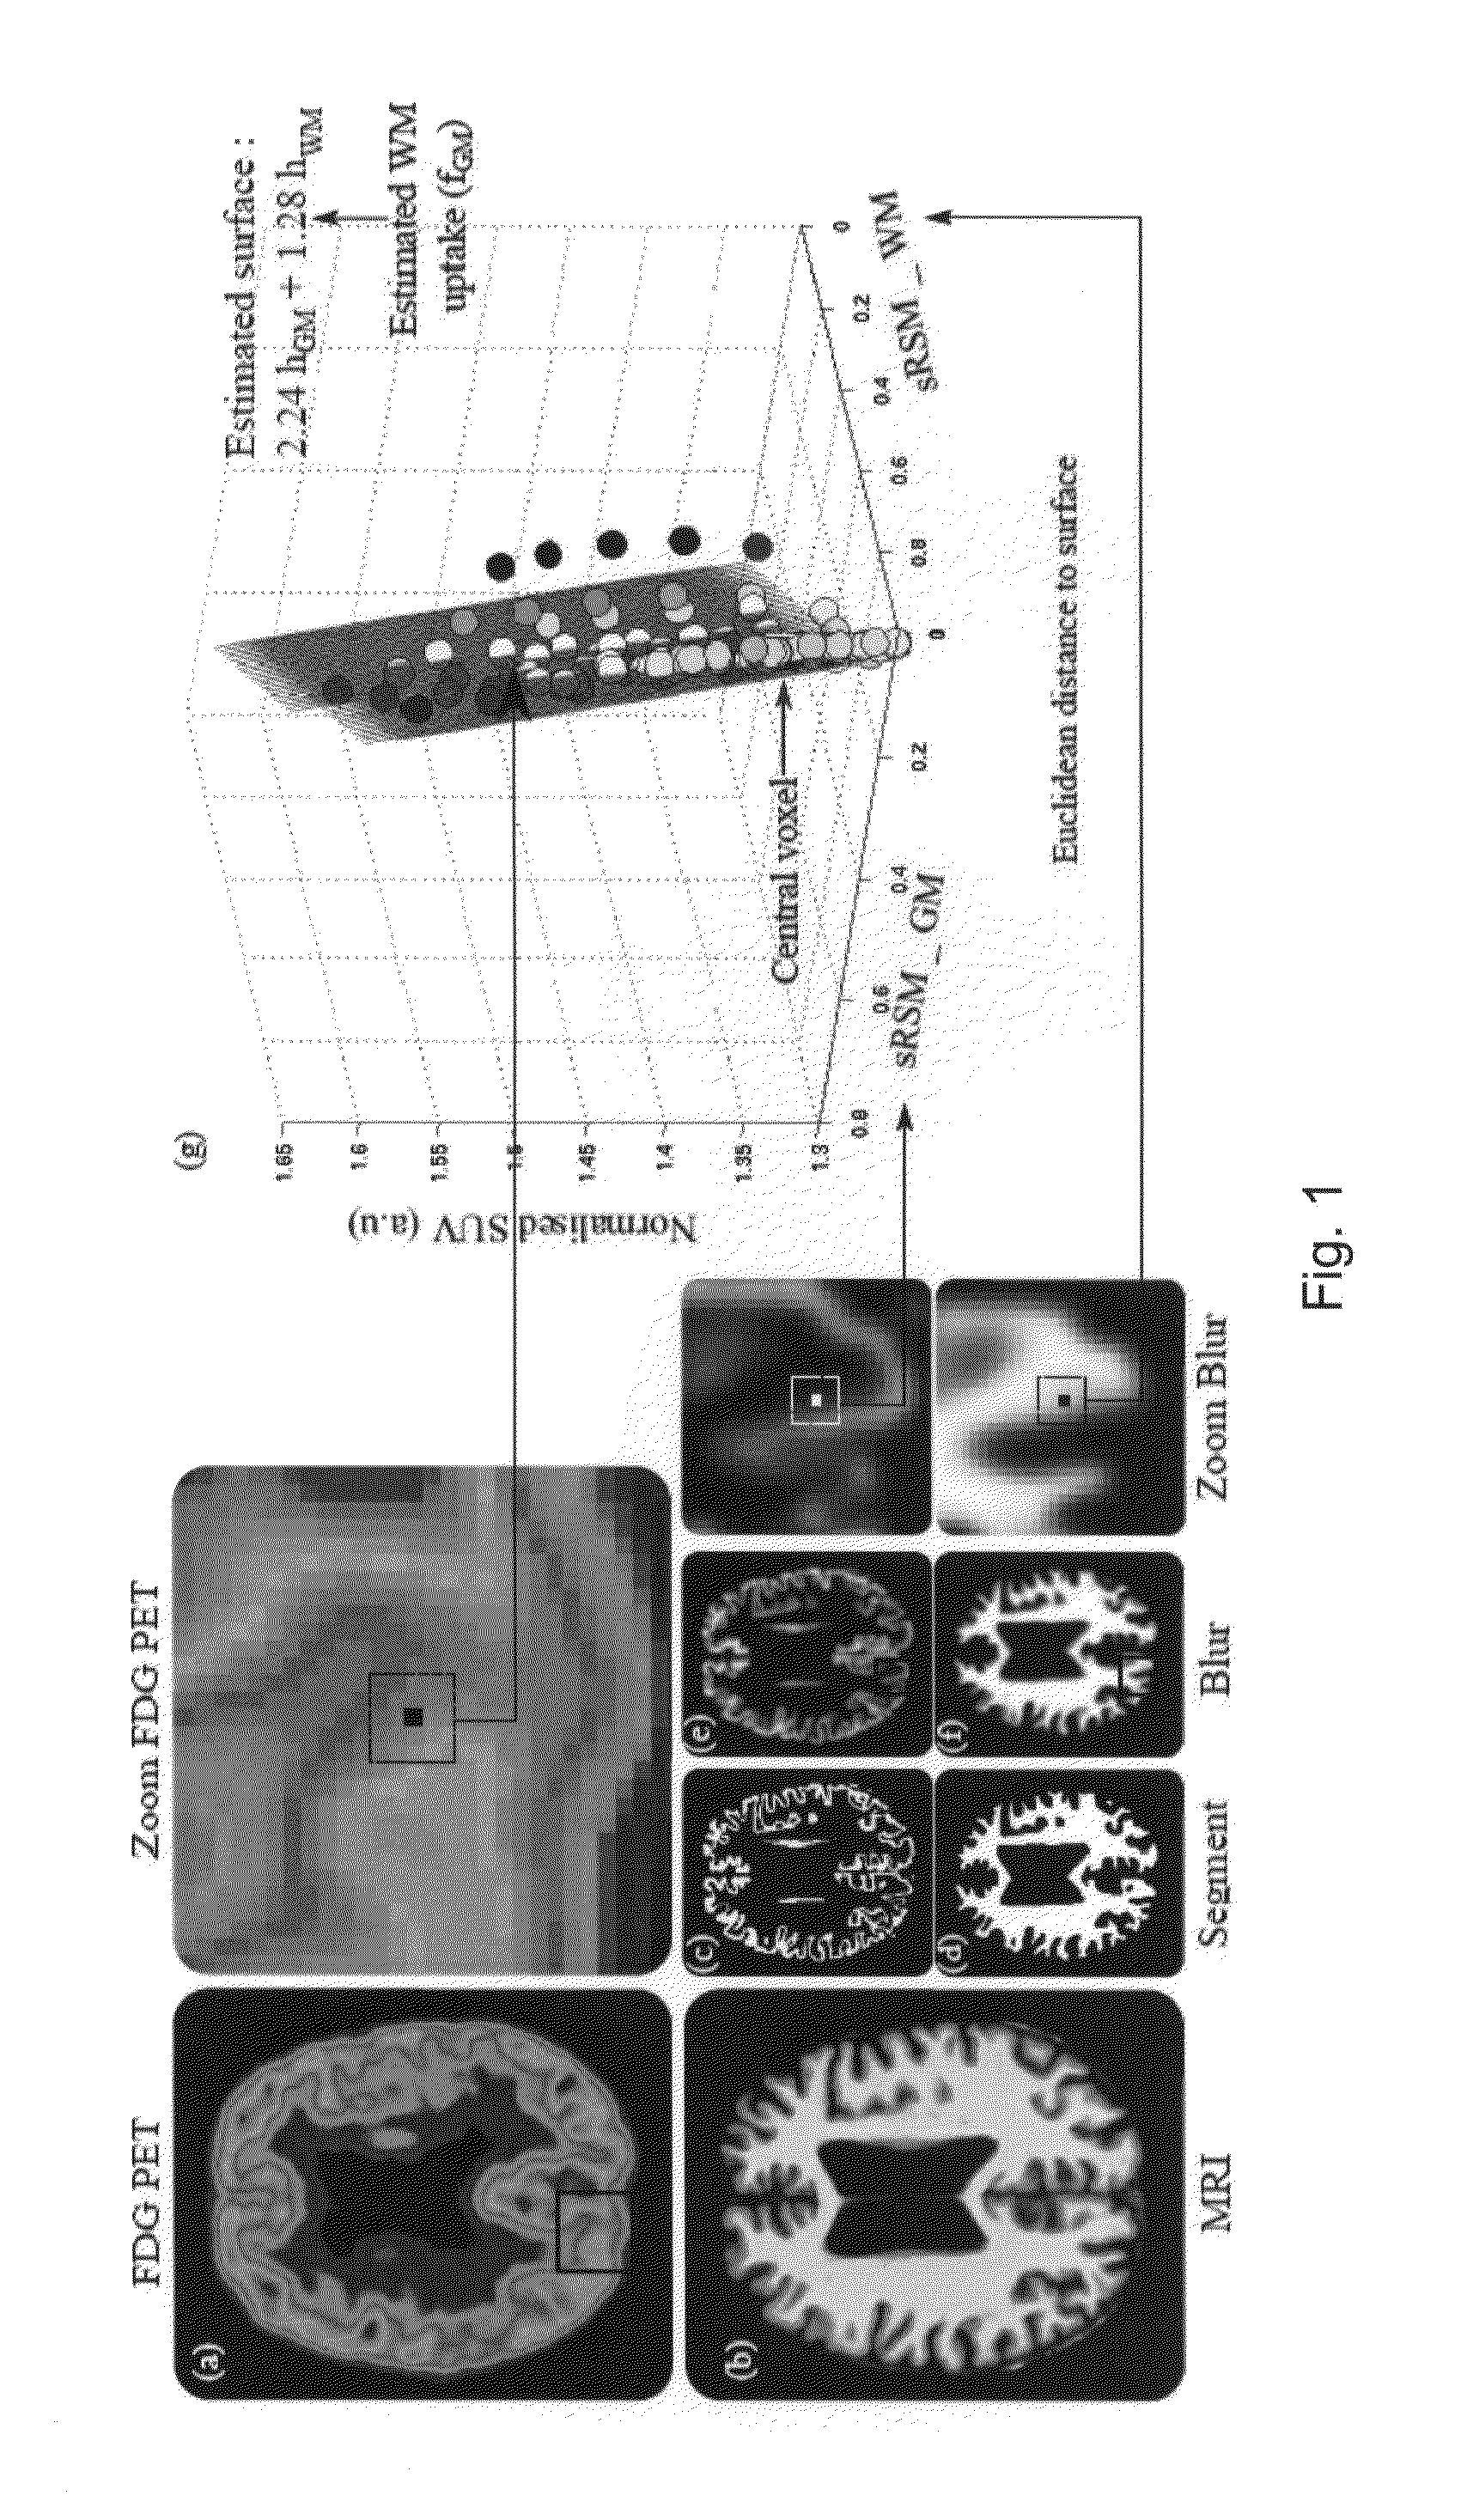 Method for improved estimation of tracer uptake in physiological image volumes